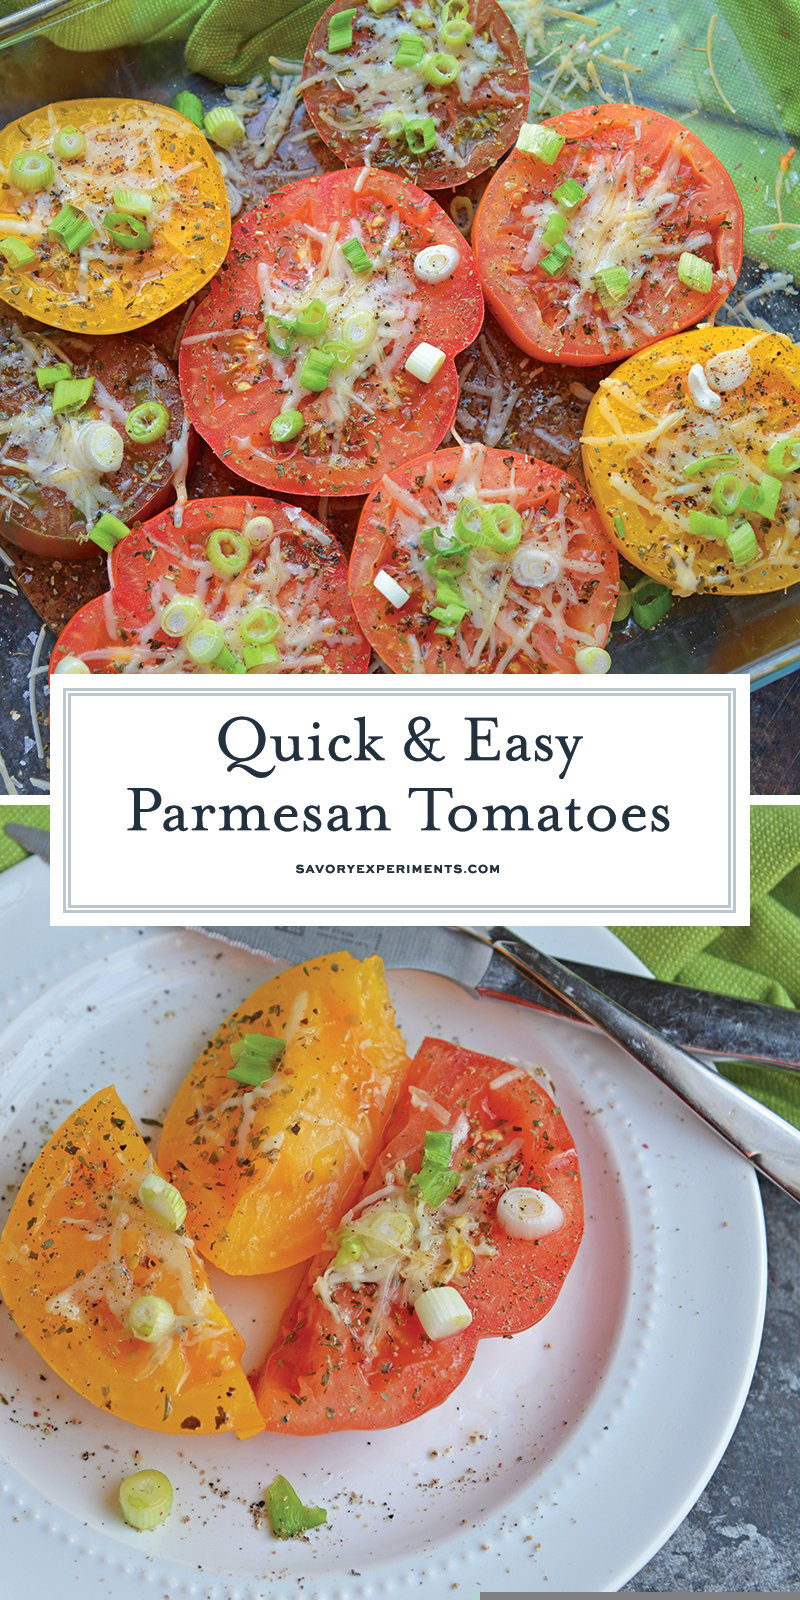 Parmesan Tomatoes are whole tomatoes, cut in half and baked with Parmesan cheese, Italian seasoning and garnished with lush scallions. An easy side dish recipe for any meal!  #tomatosidedishrecipes www.savoryexperiments.com 